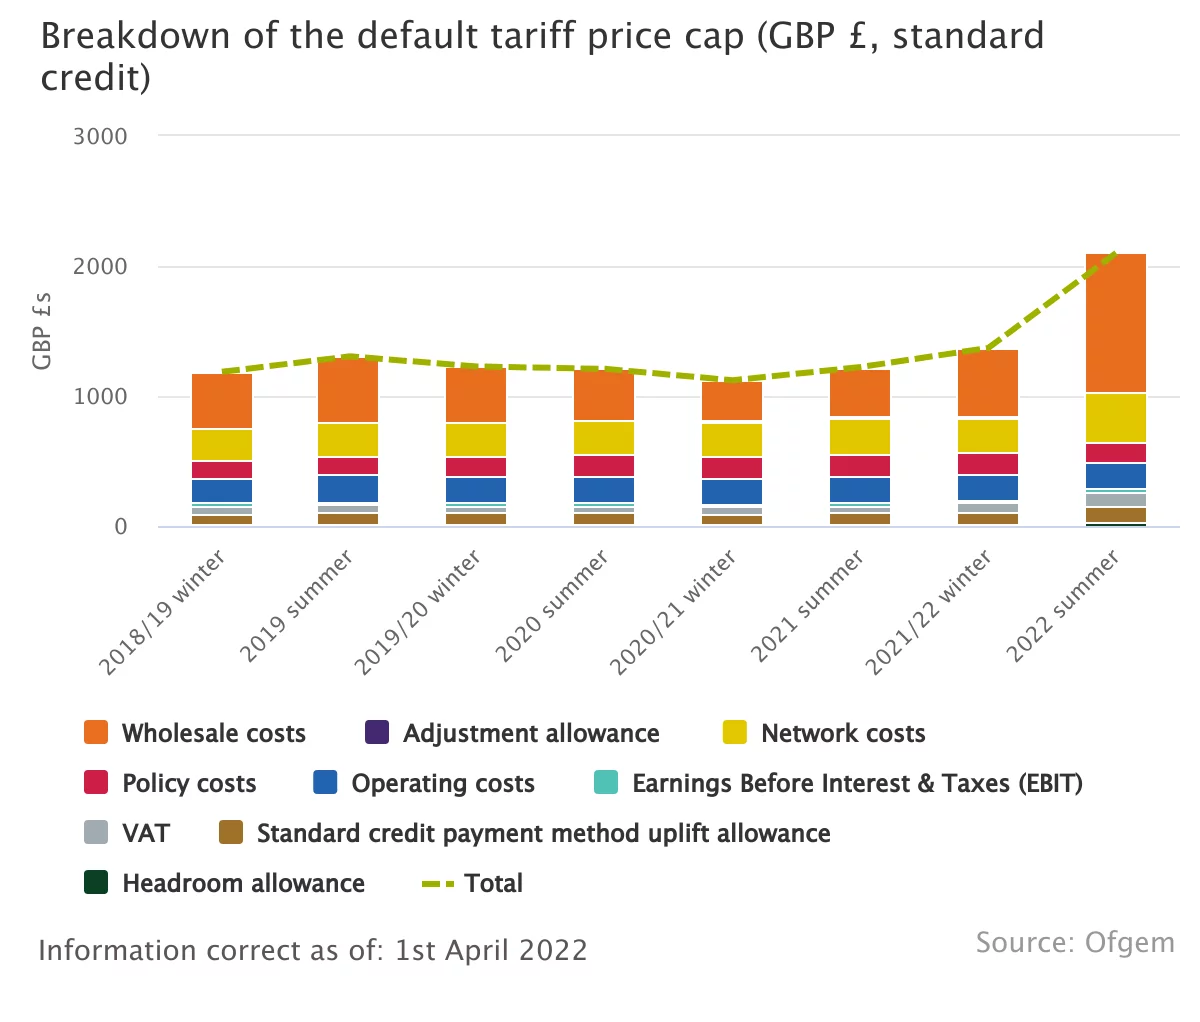 This chart from Ofgem shows a breakdown of the costs that make up the default tariff price cap for a dual-fuel, standard credit customer with typical consumption.